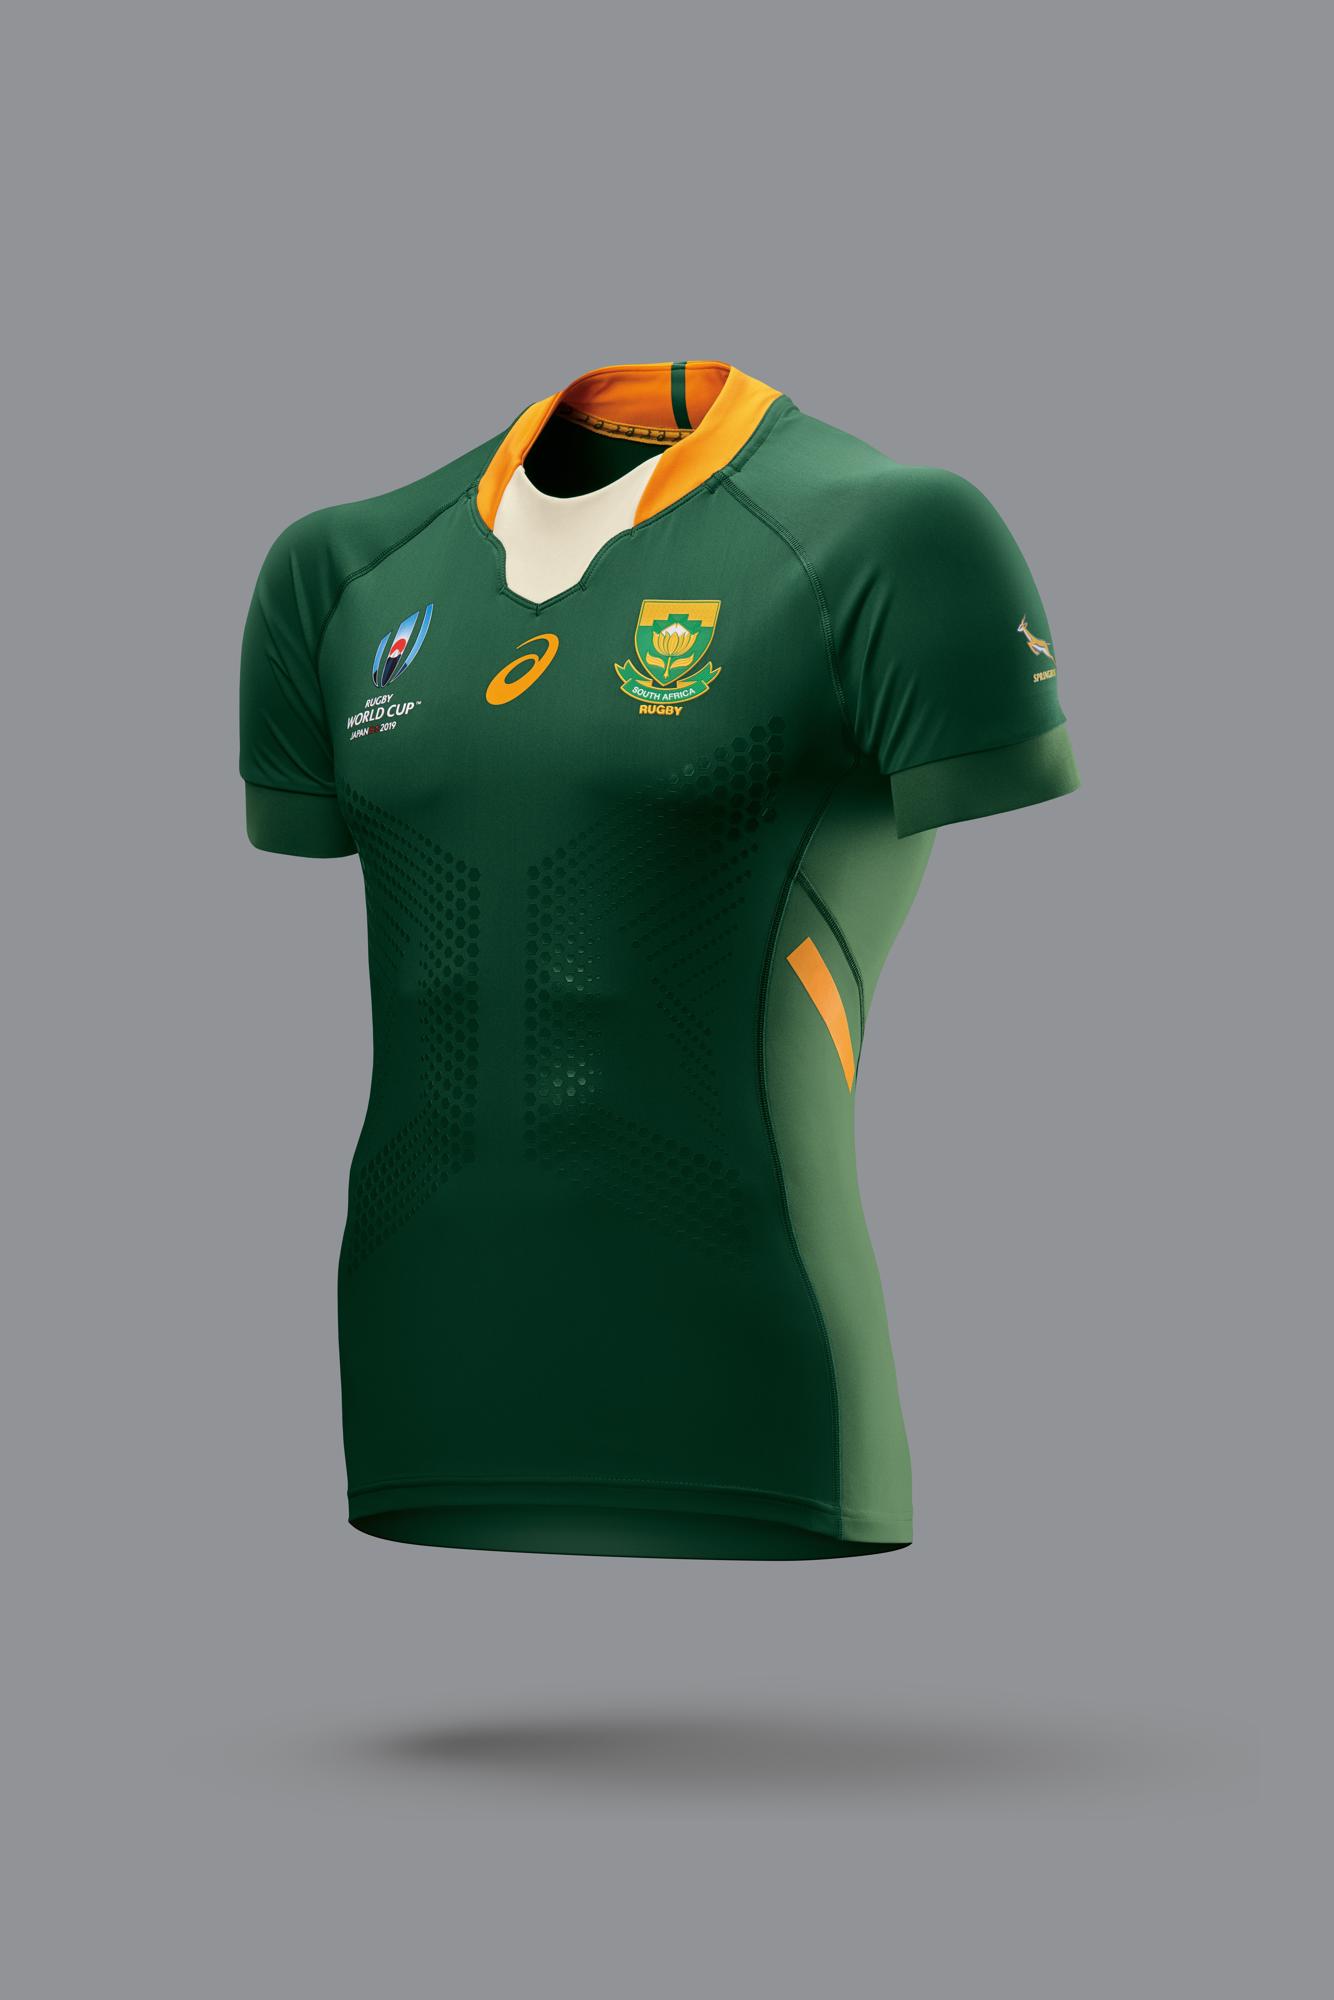 ASICS launch new ‘Unstoppable’ Springbok jersey for 2019 Rugby World